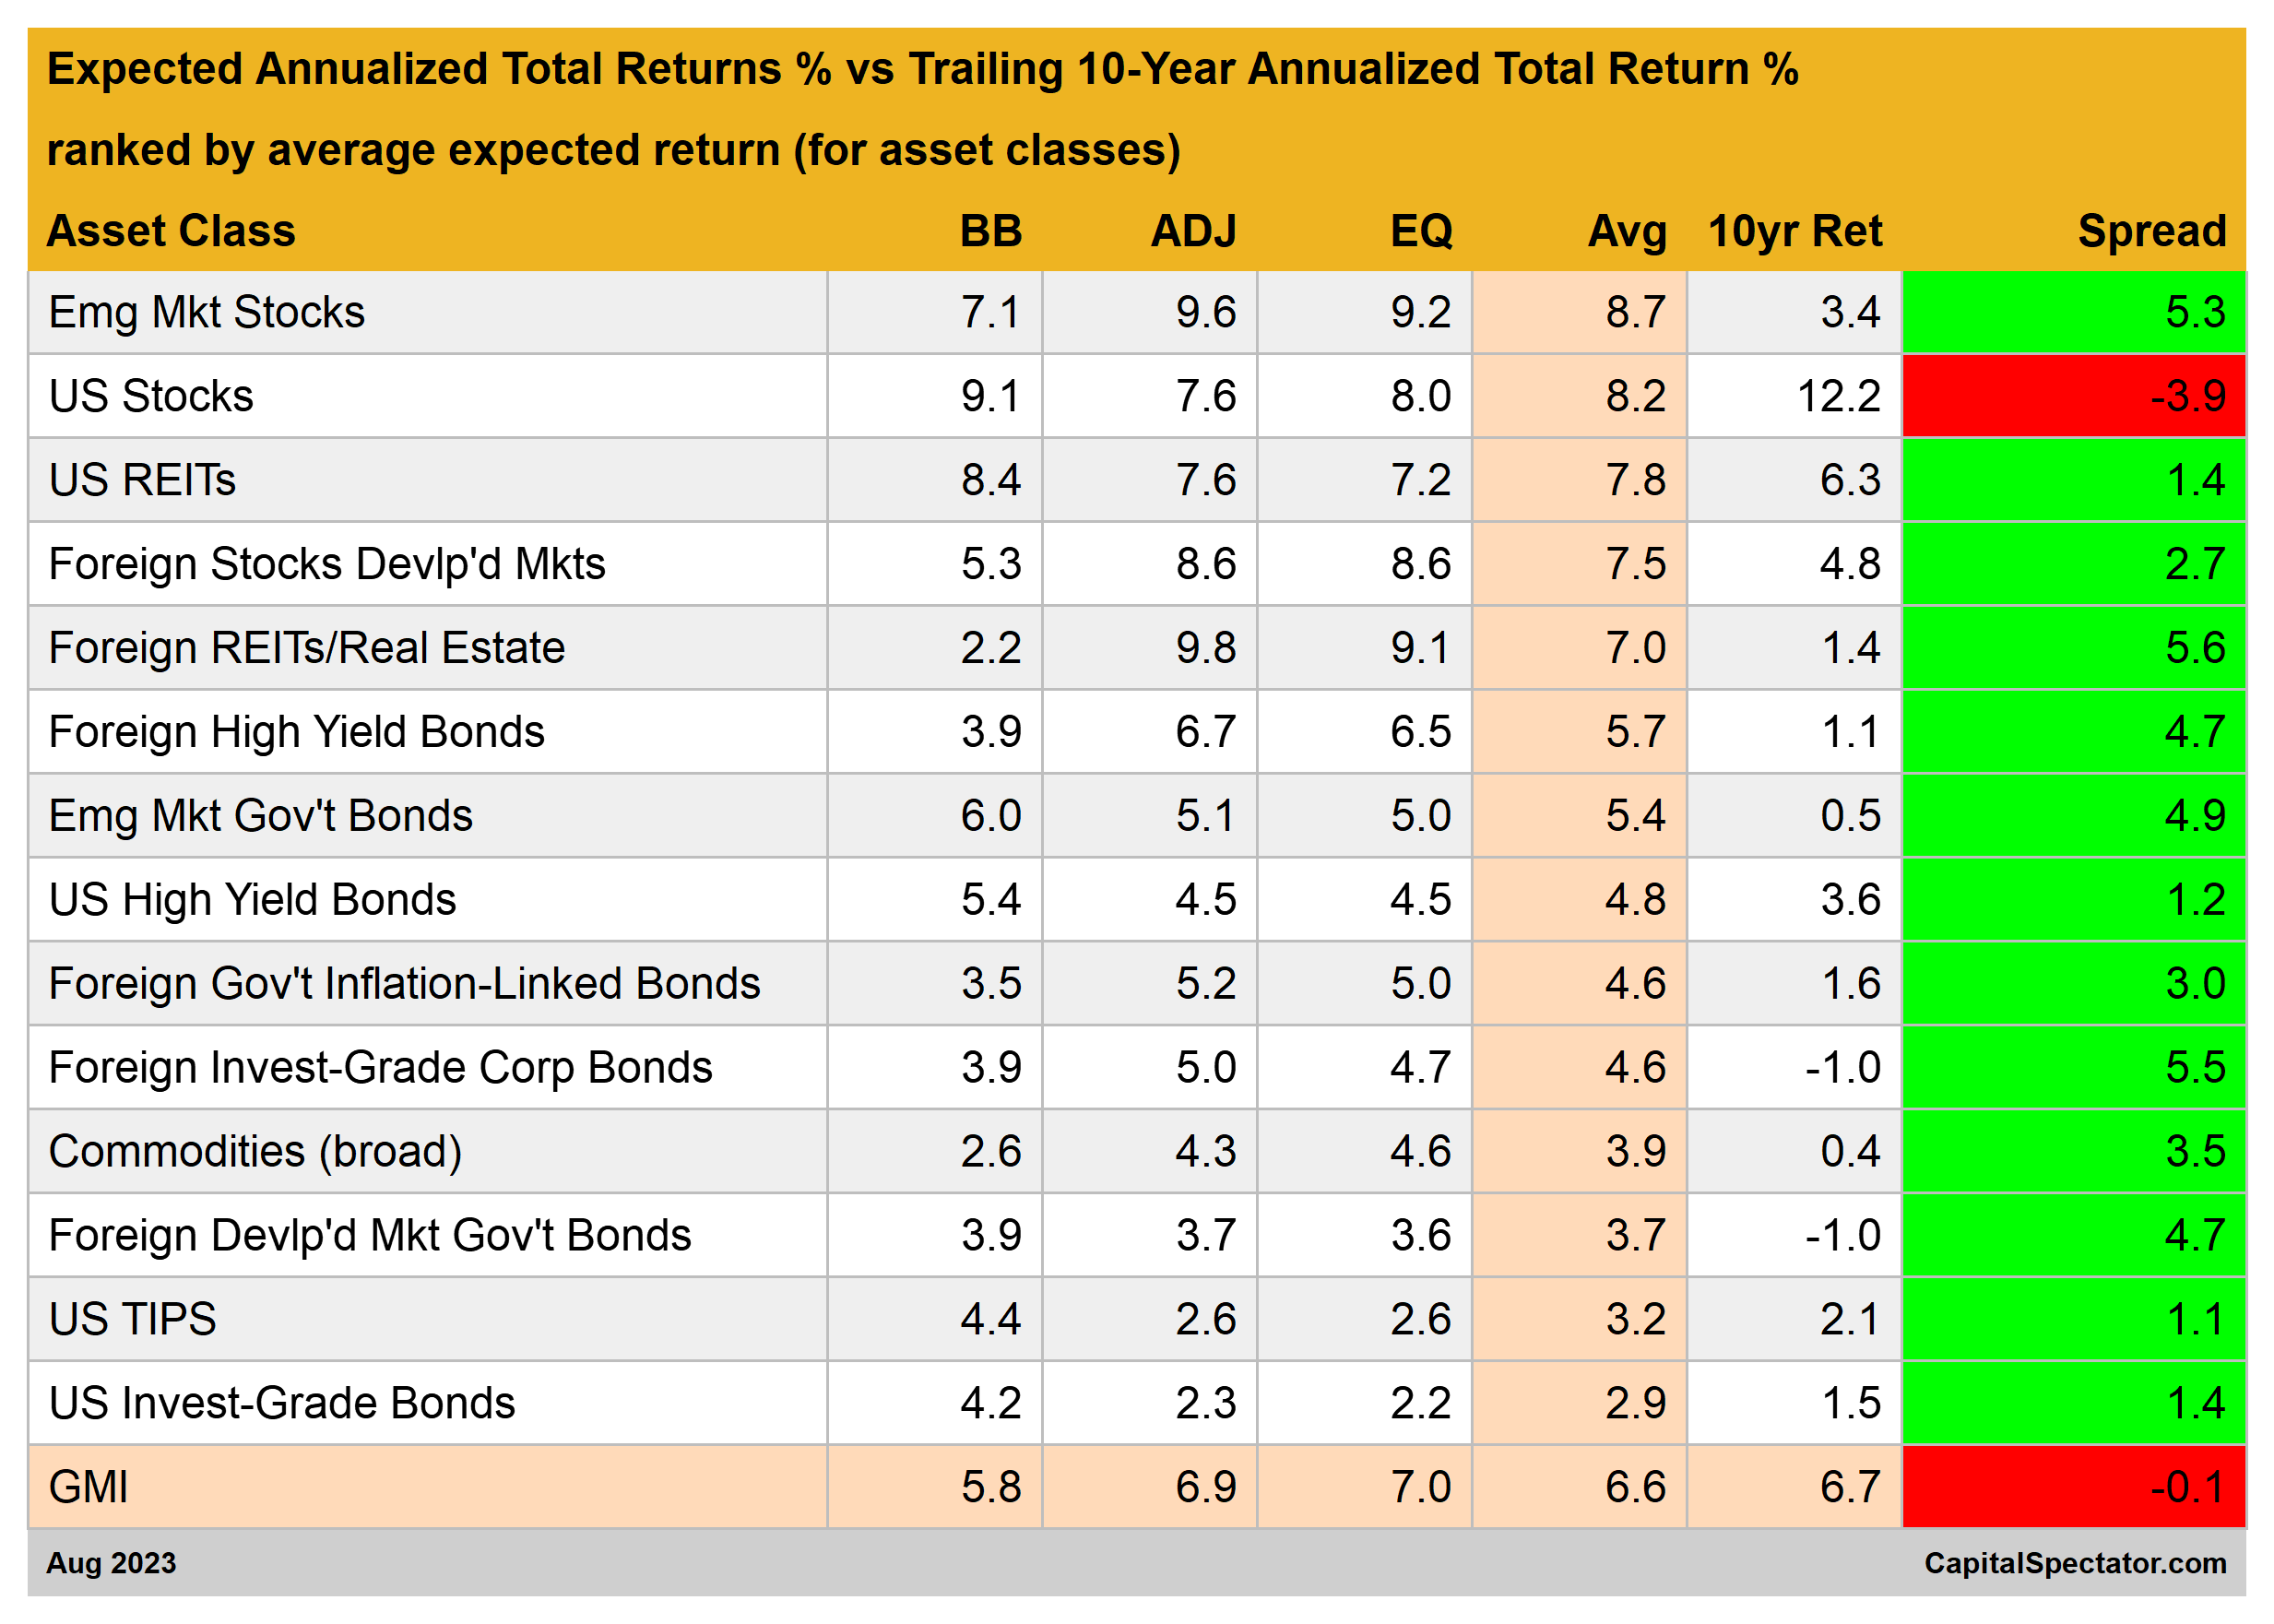 Expected Annualized Total Returns